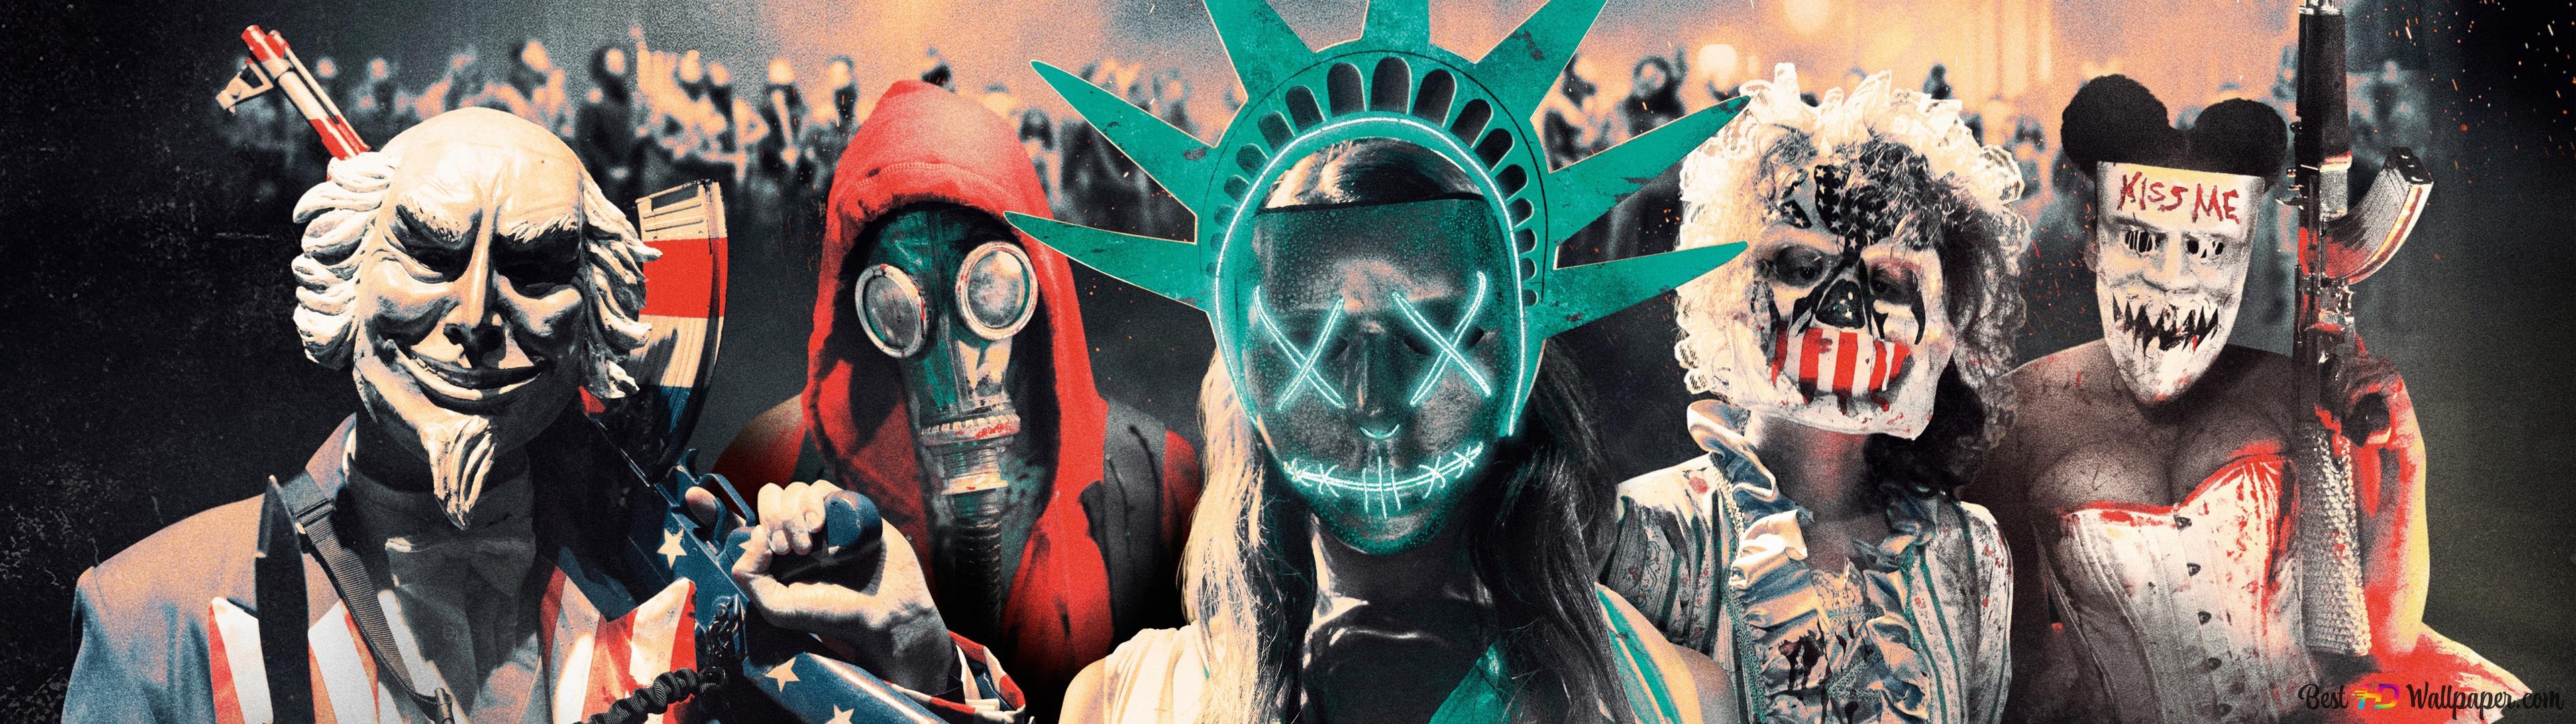 The purge election year k wallpaper download